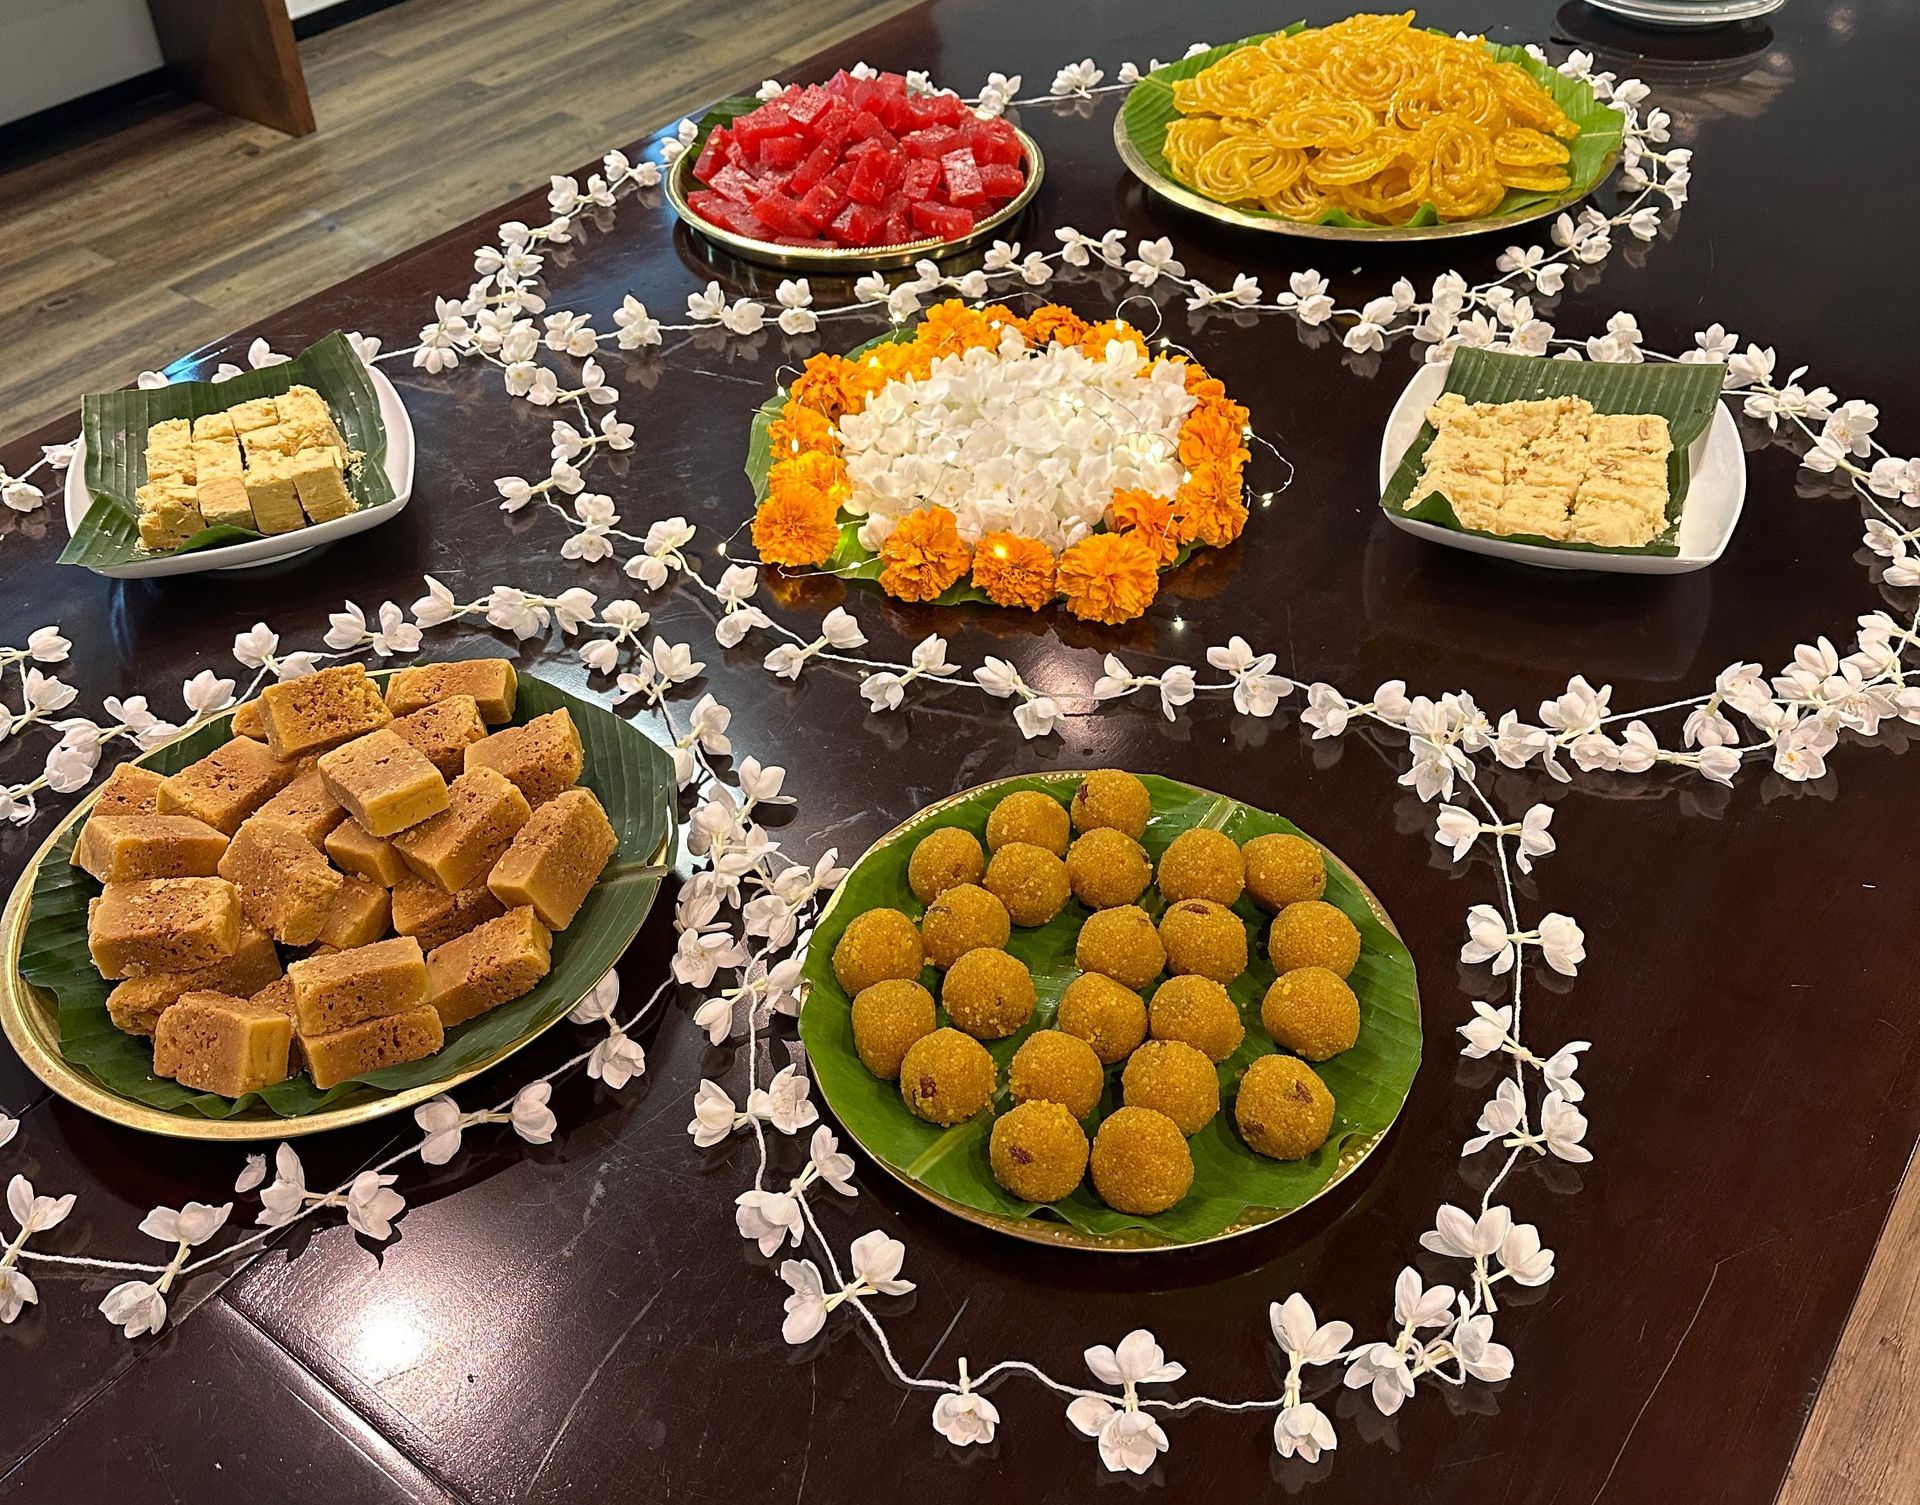 A spread of delicious sweets to celebrate Diwali